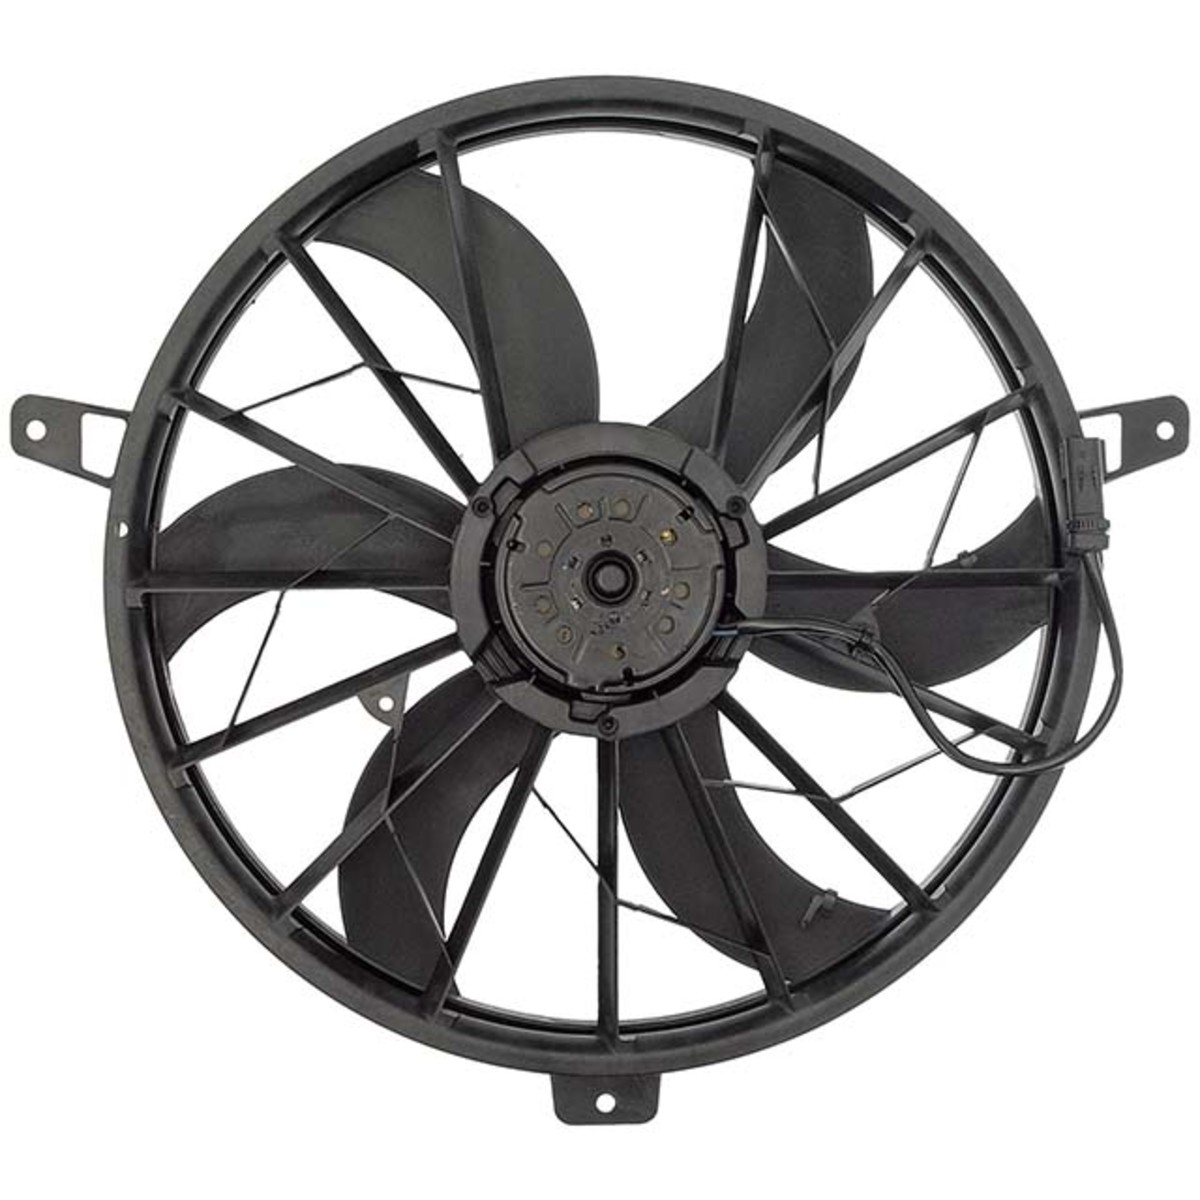 A-Premium Radiator Cooling Fan Assembly for Jeep Grand Cherokee Liberty 620-010